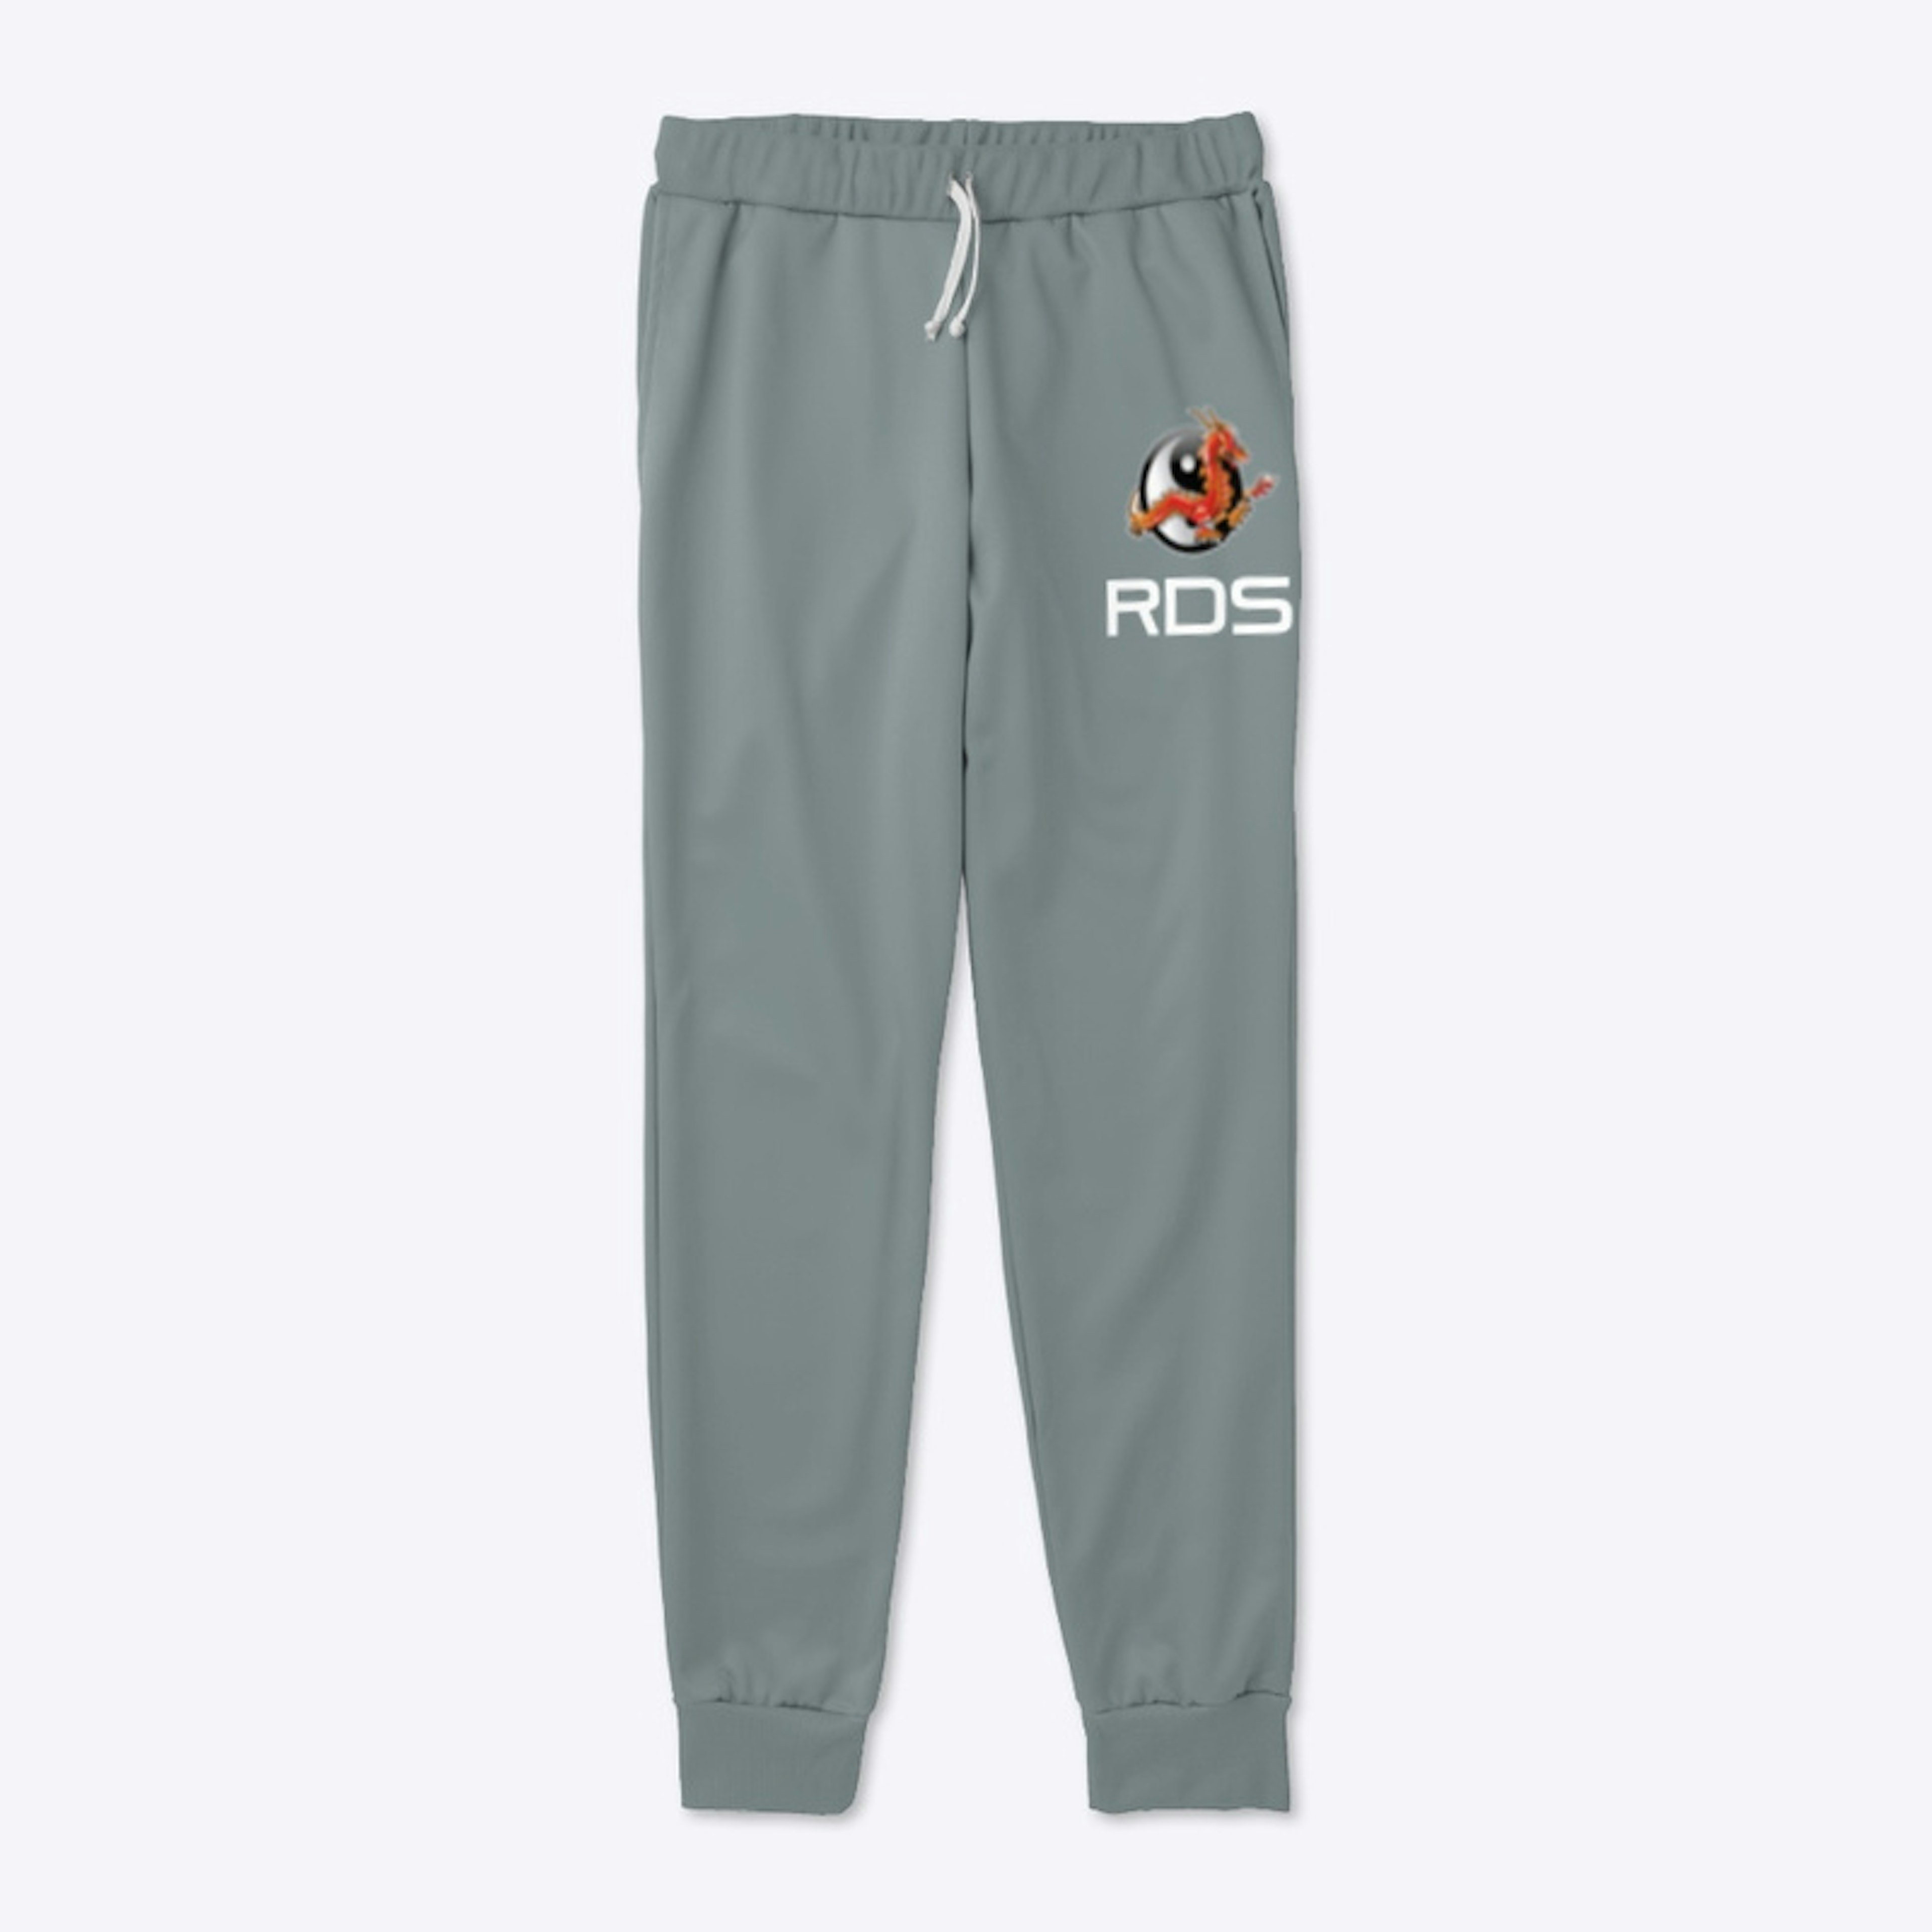 RDS Tracksuit Bottoms